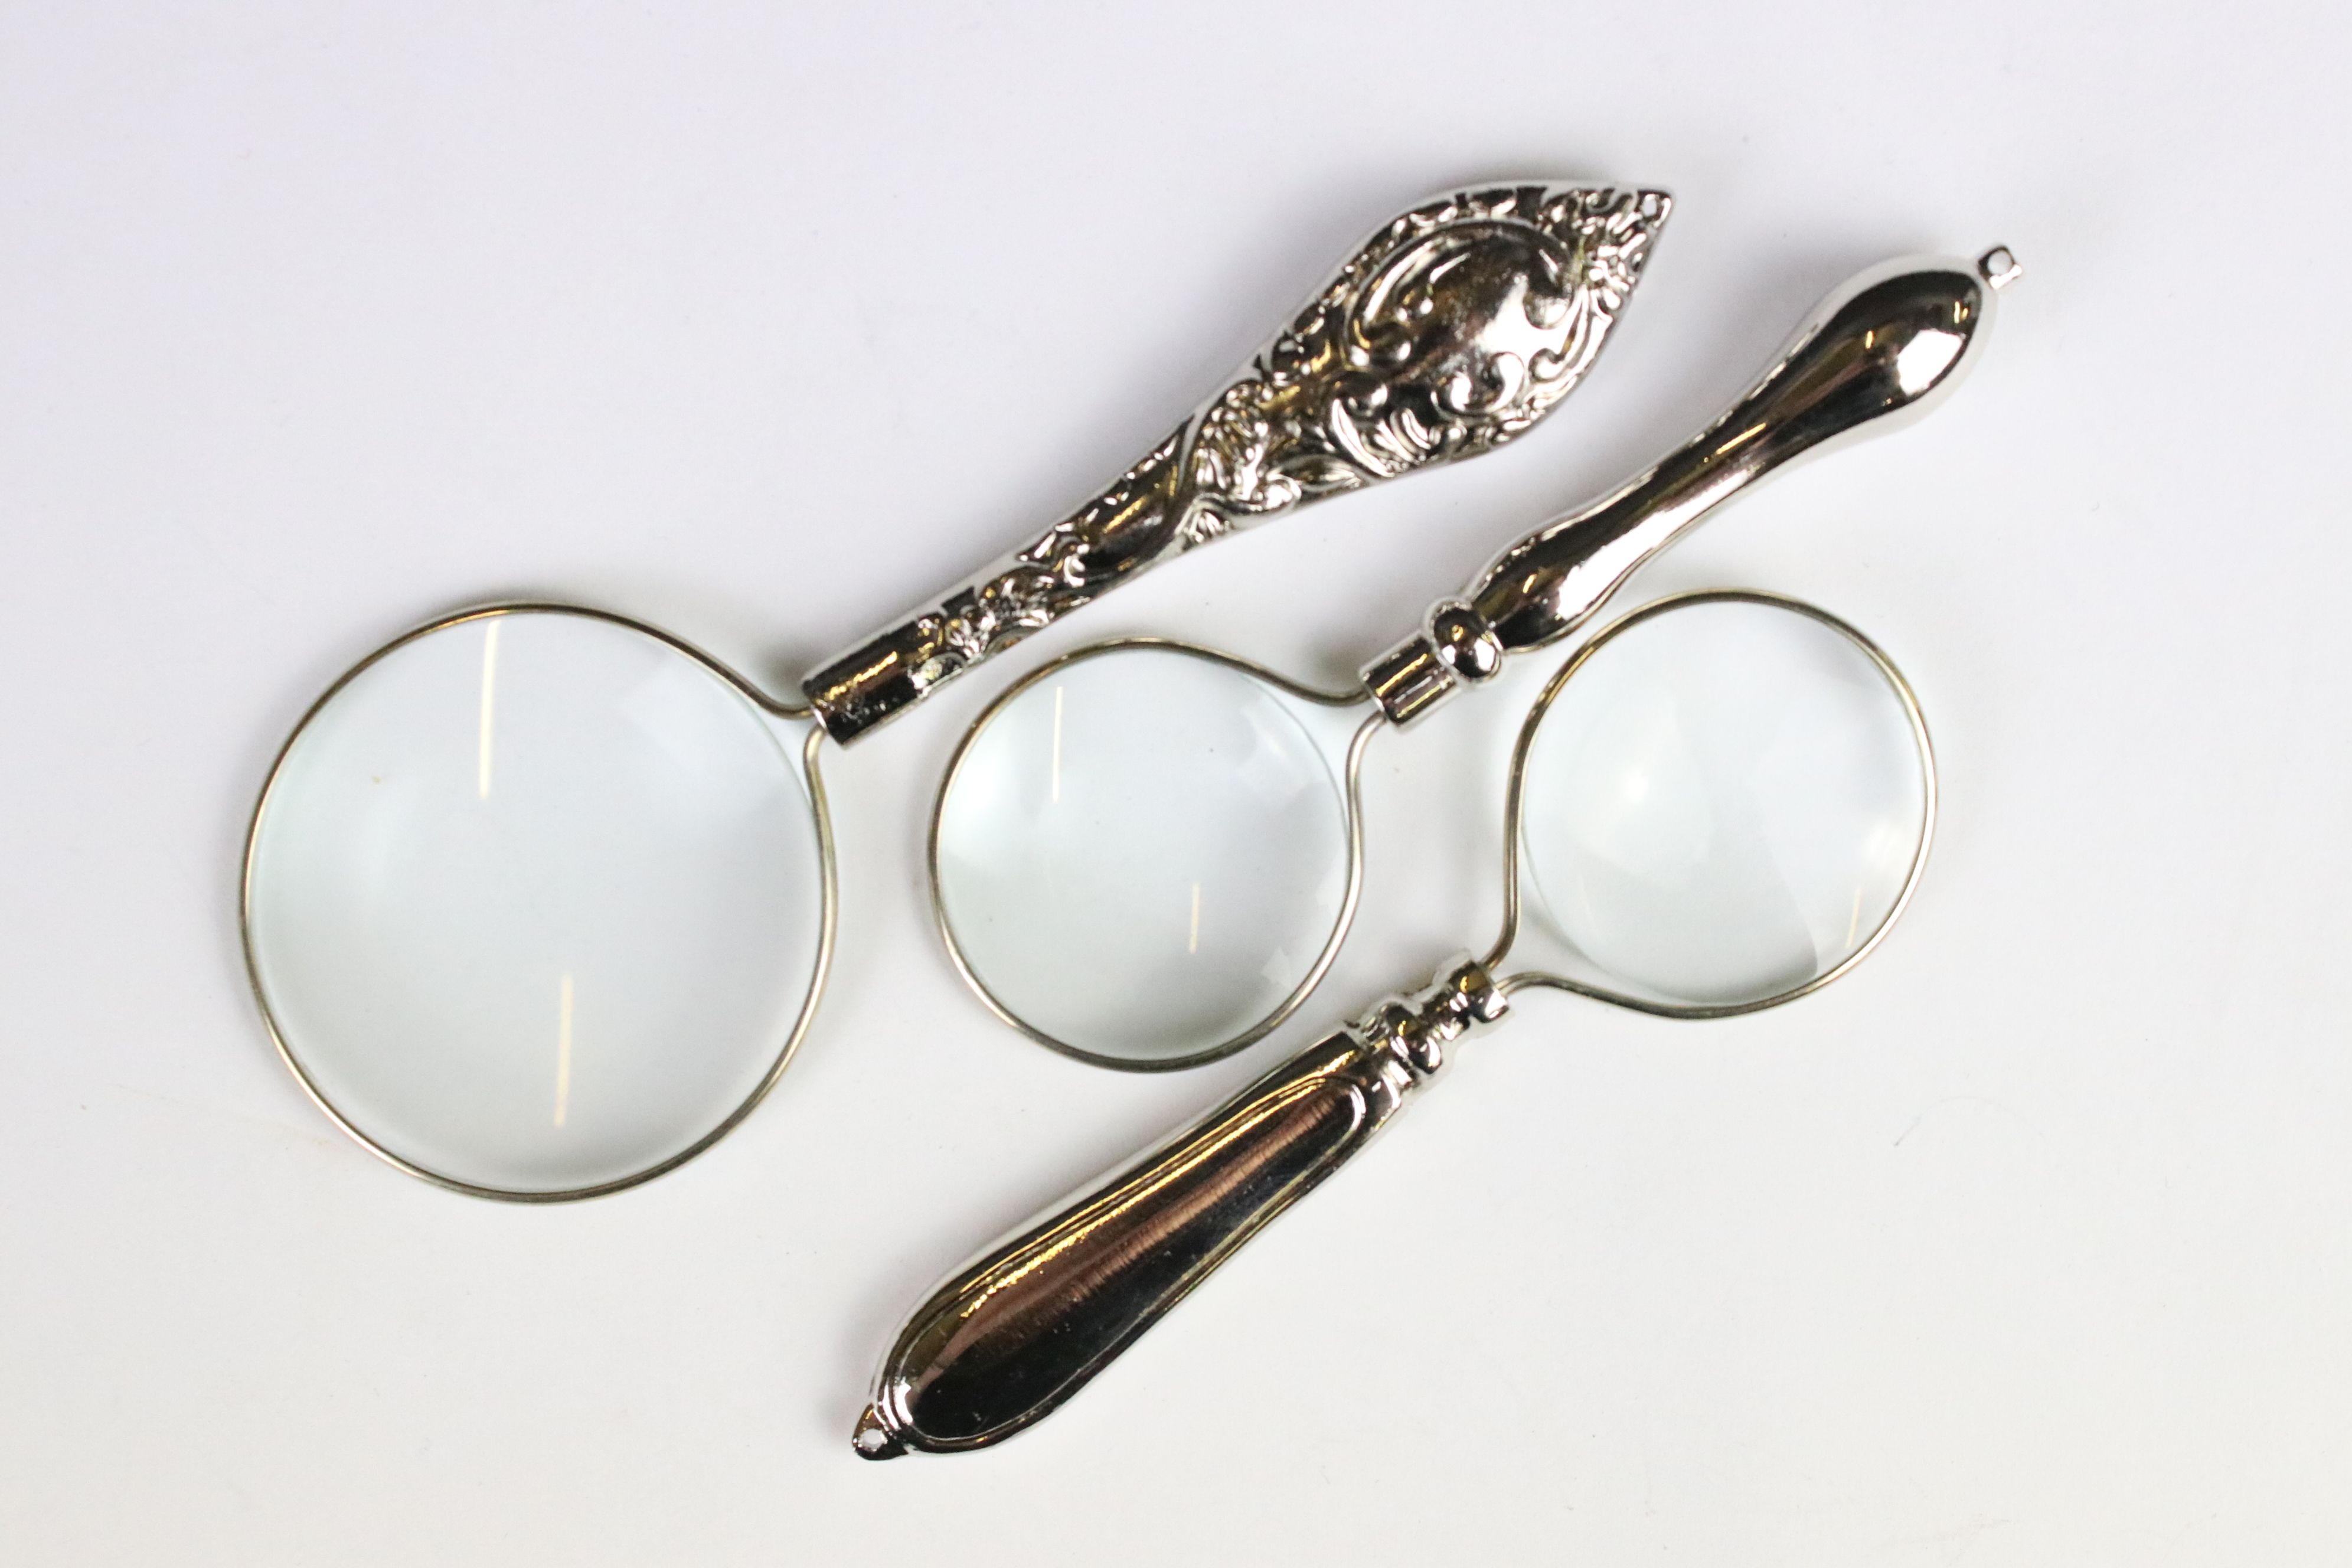 A set of three silver plated magnifying glasses.